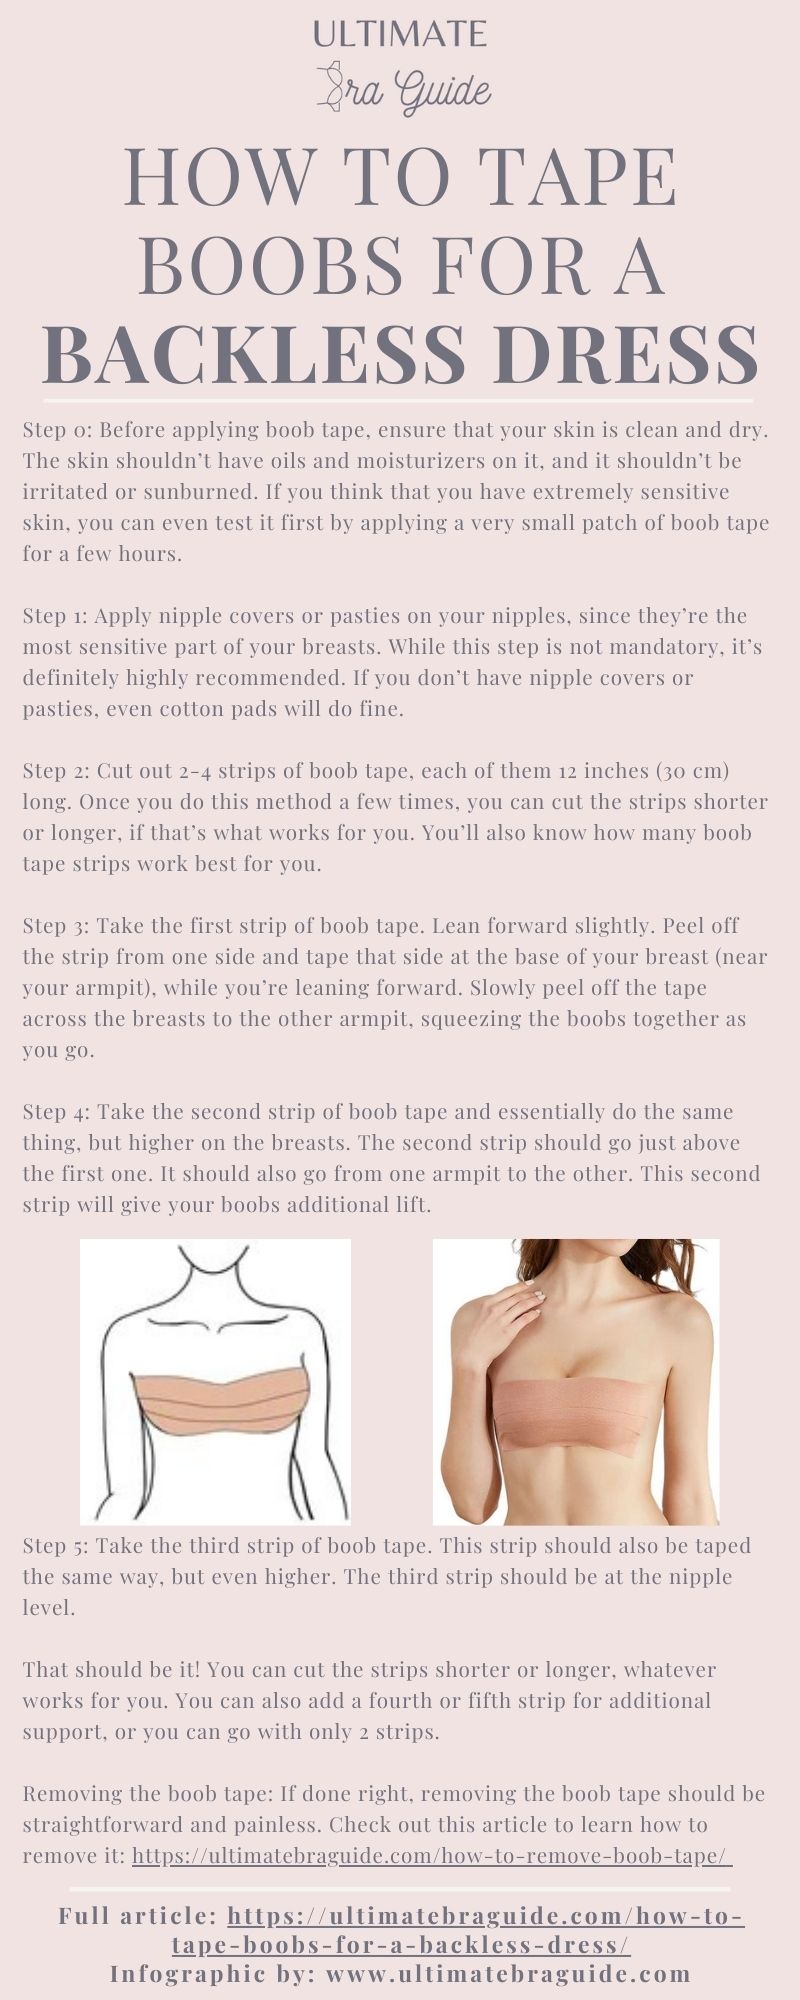 How To Tape Boobs for a Backless Dress Infographic - This shows a step by step guide to taping your breasts for a backless dress